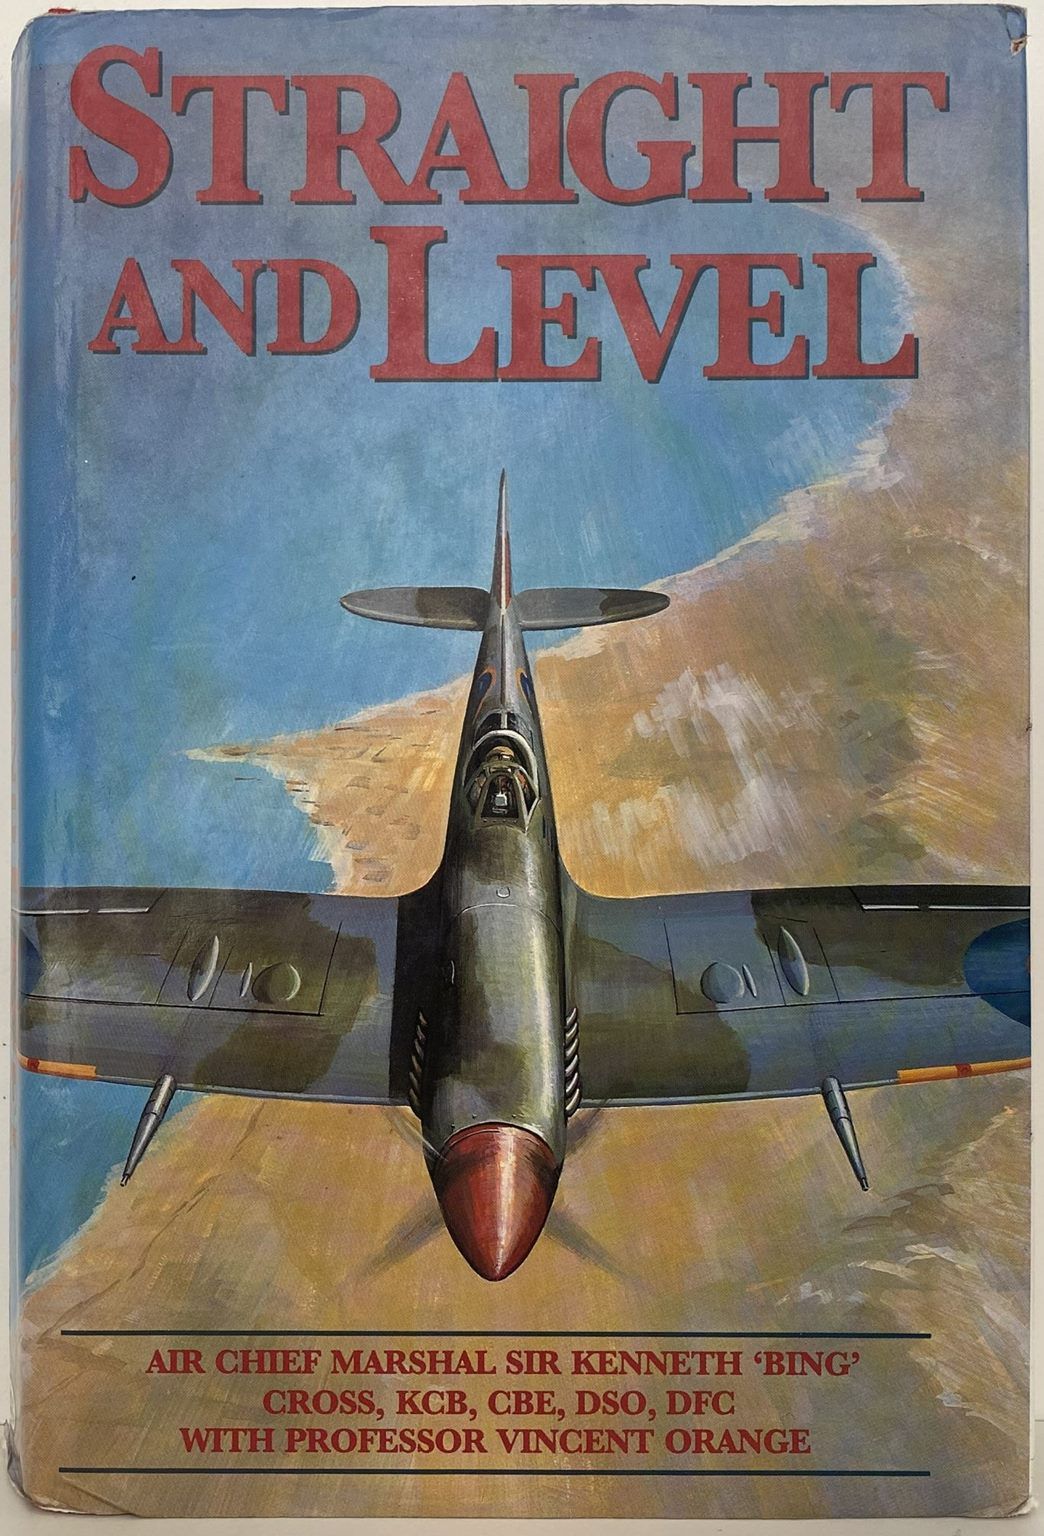 STRAIGHT AND LEVEL: Biography of Air Chief Marshal, Sir Kenneth 'Bing' Cross